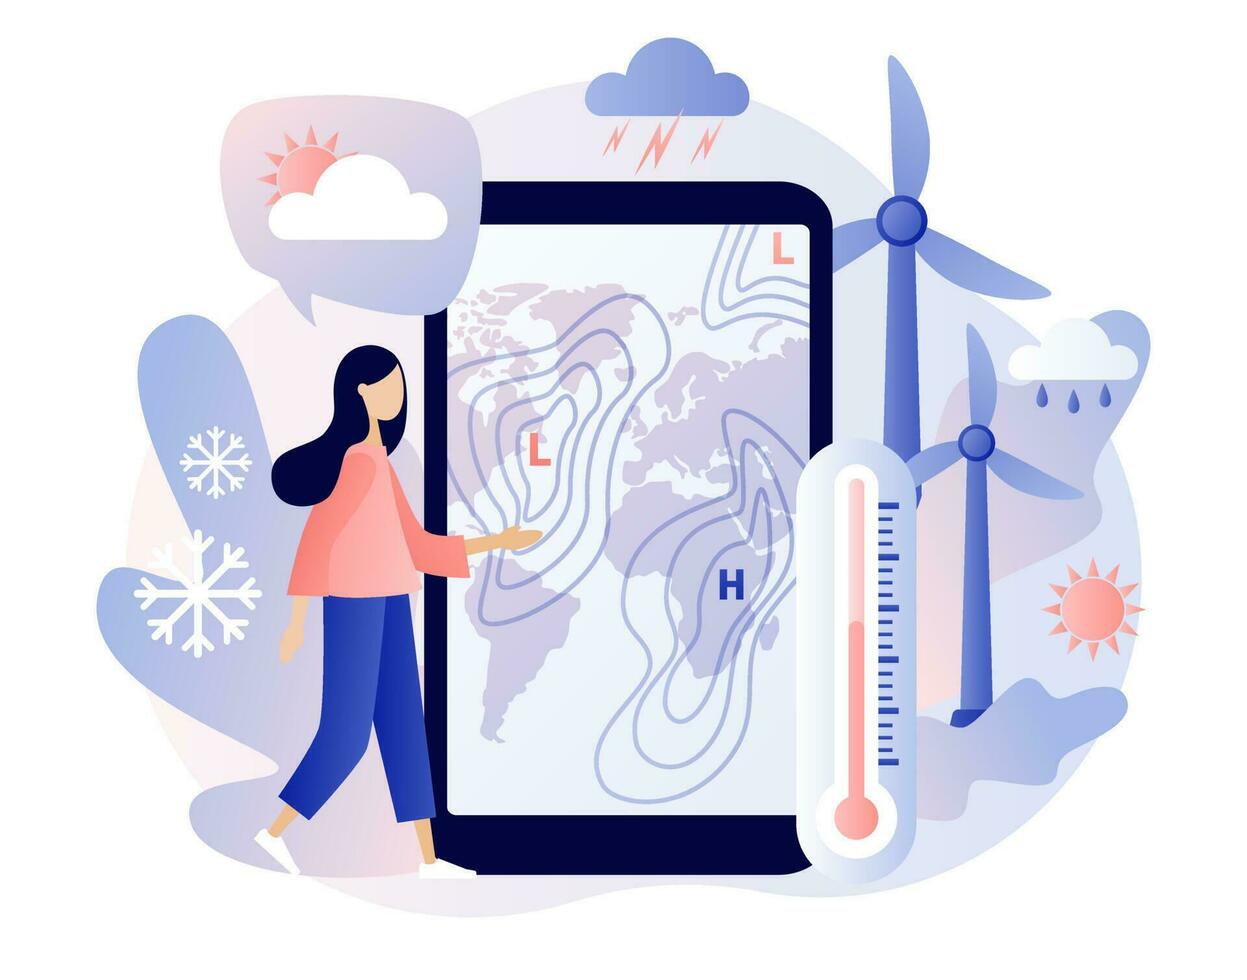 World Meteorological day. Meteorology science. Tiny woman meteorologist studying and researching weather and climate condition with smartphone app. Modern flat cartoon style. Vector illustration